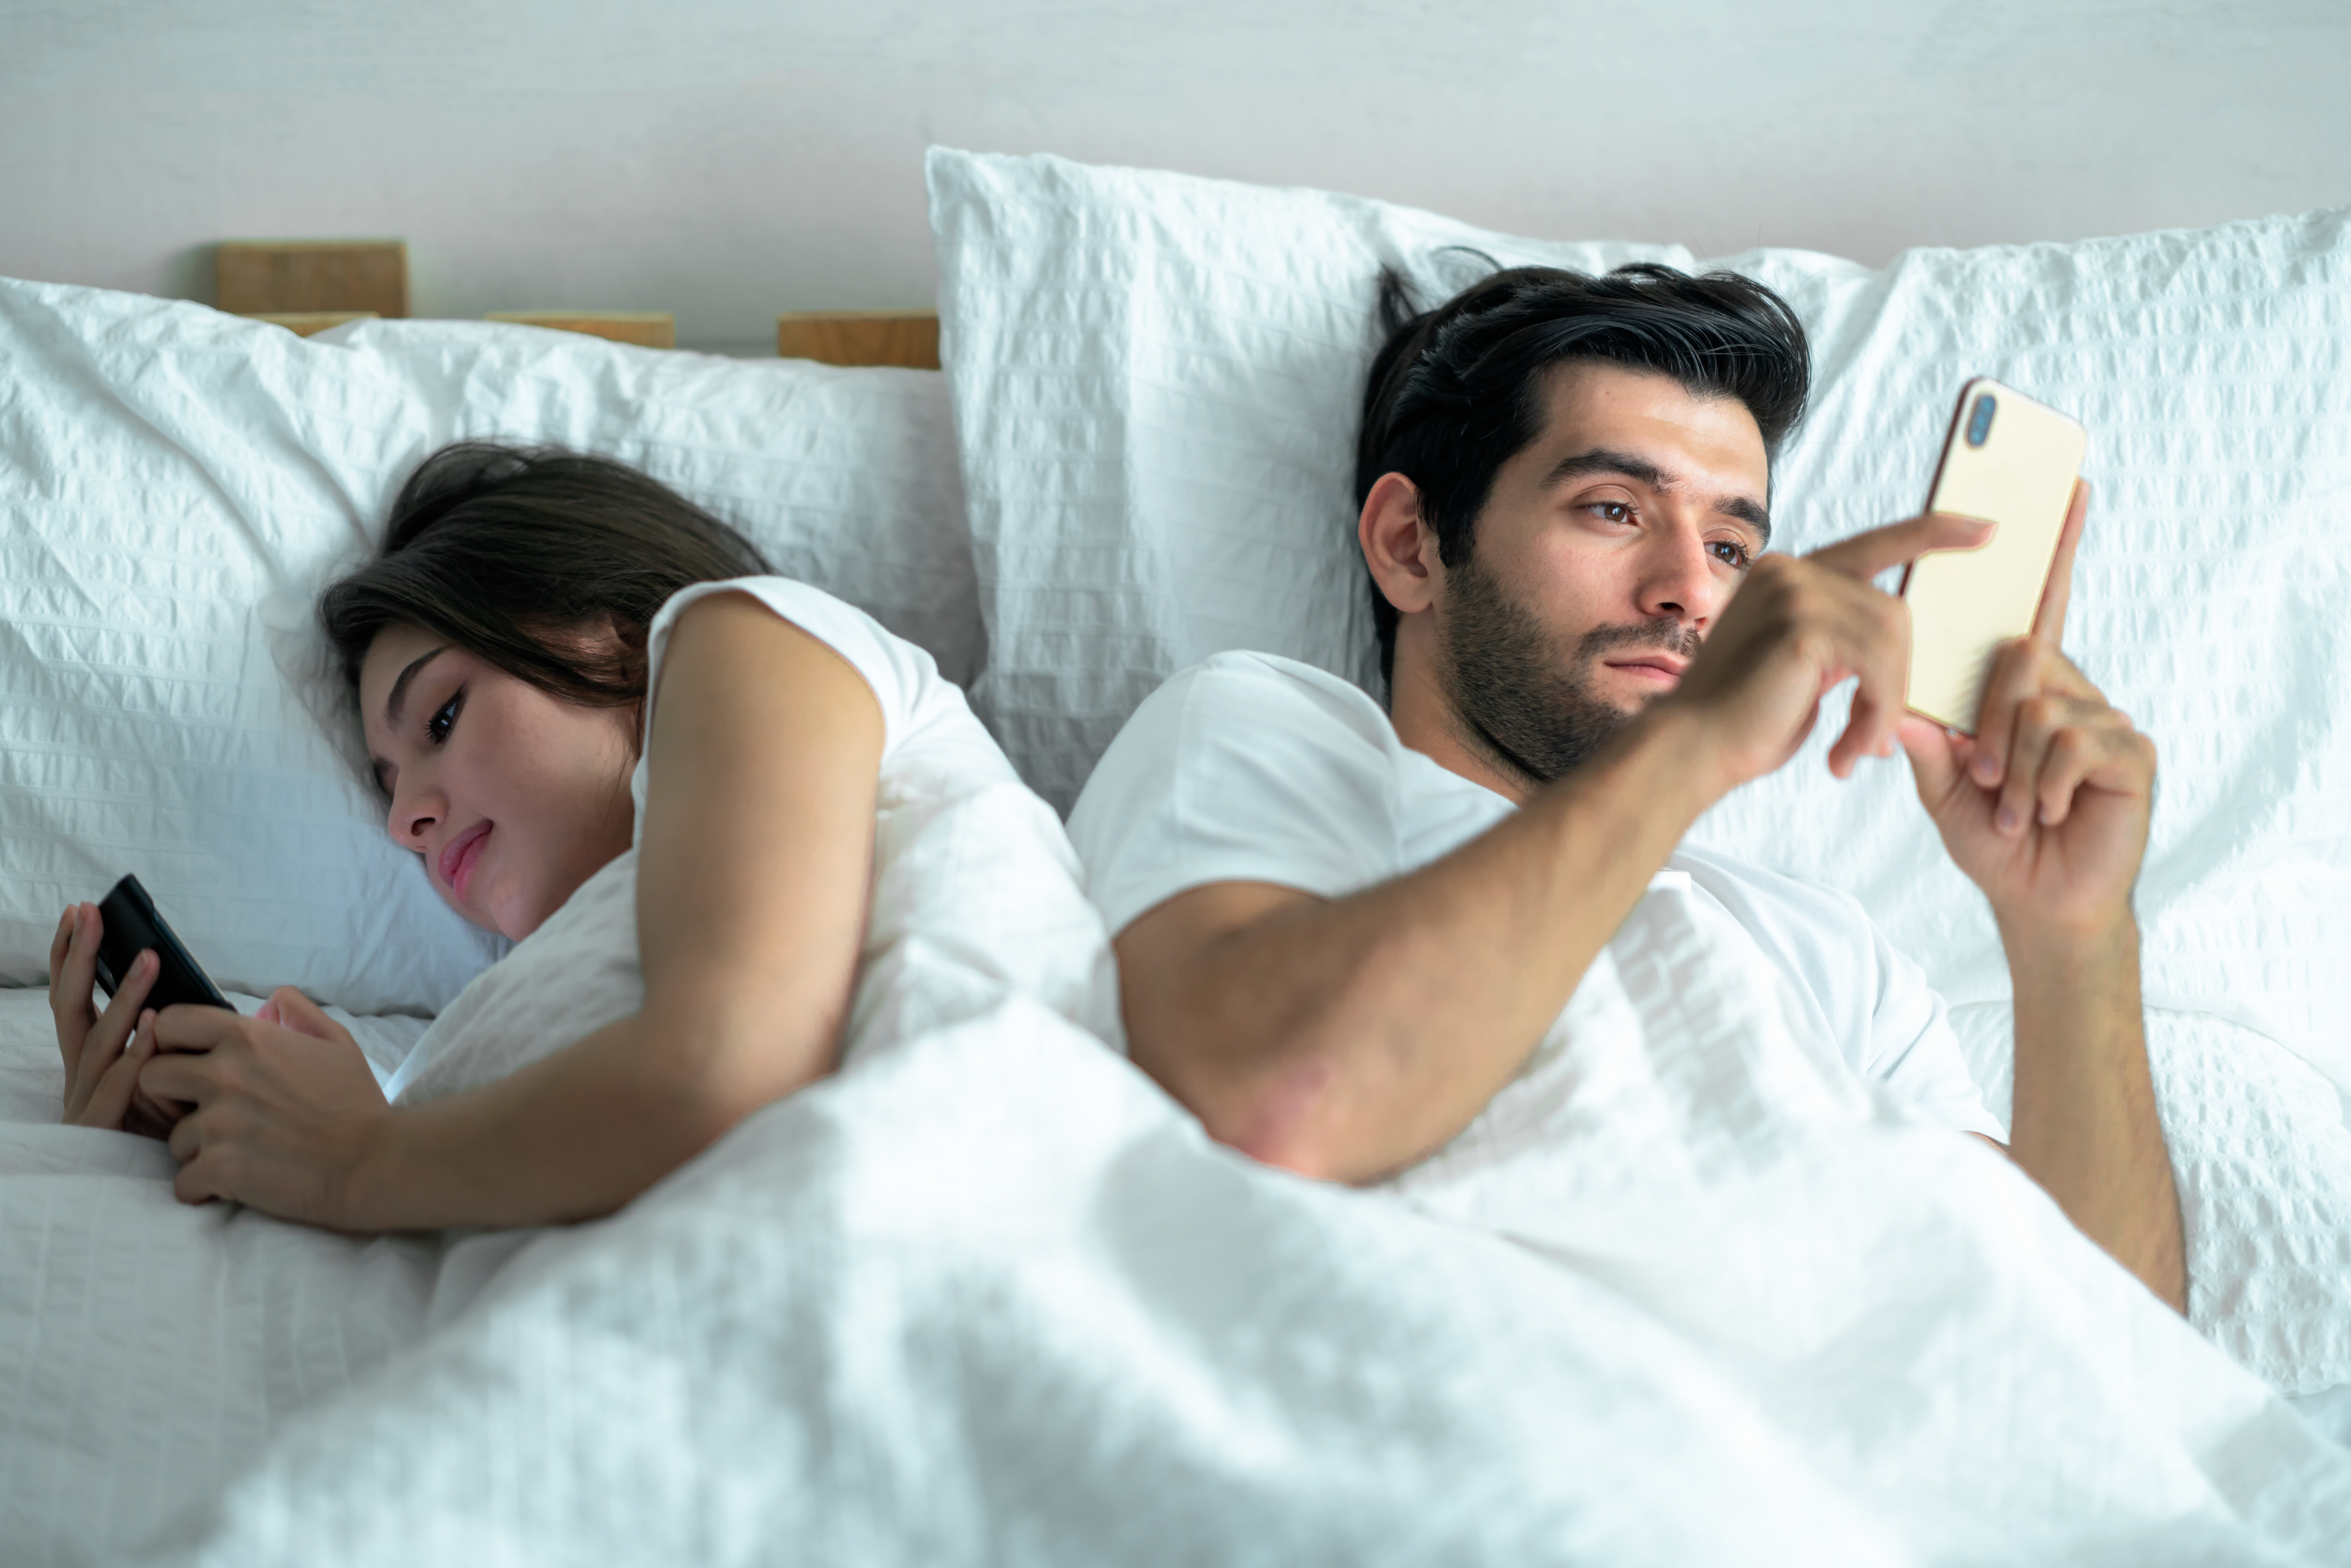 Sex Or Your Phone Which Would You Give Up More Easily? HuffPost UK Life